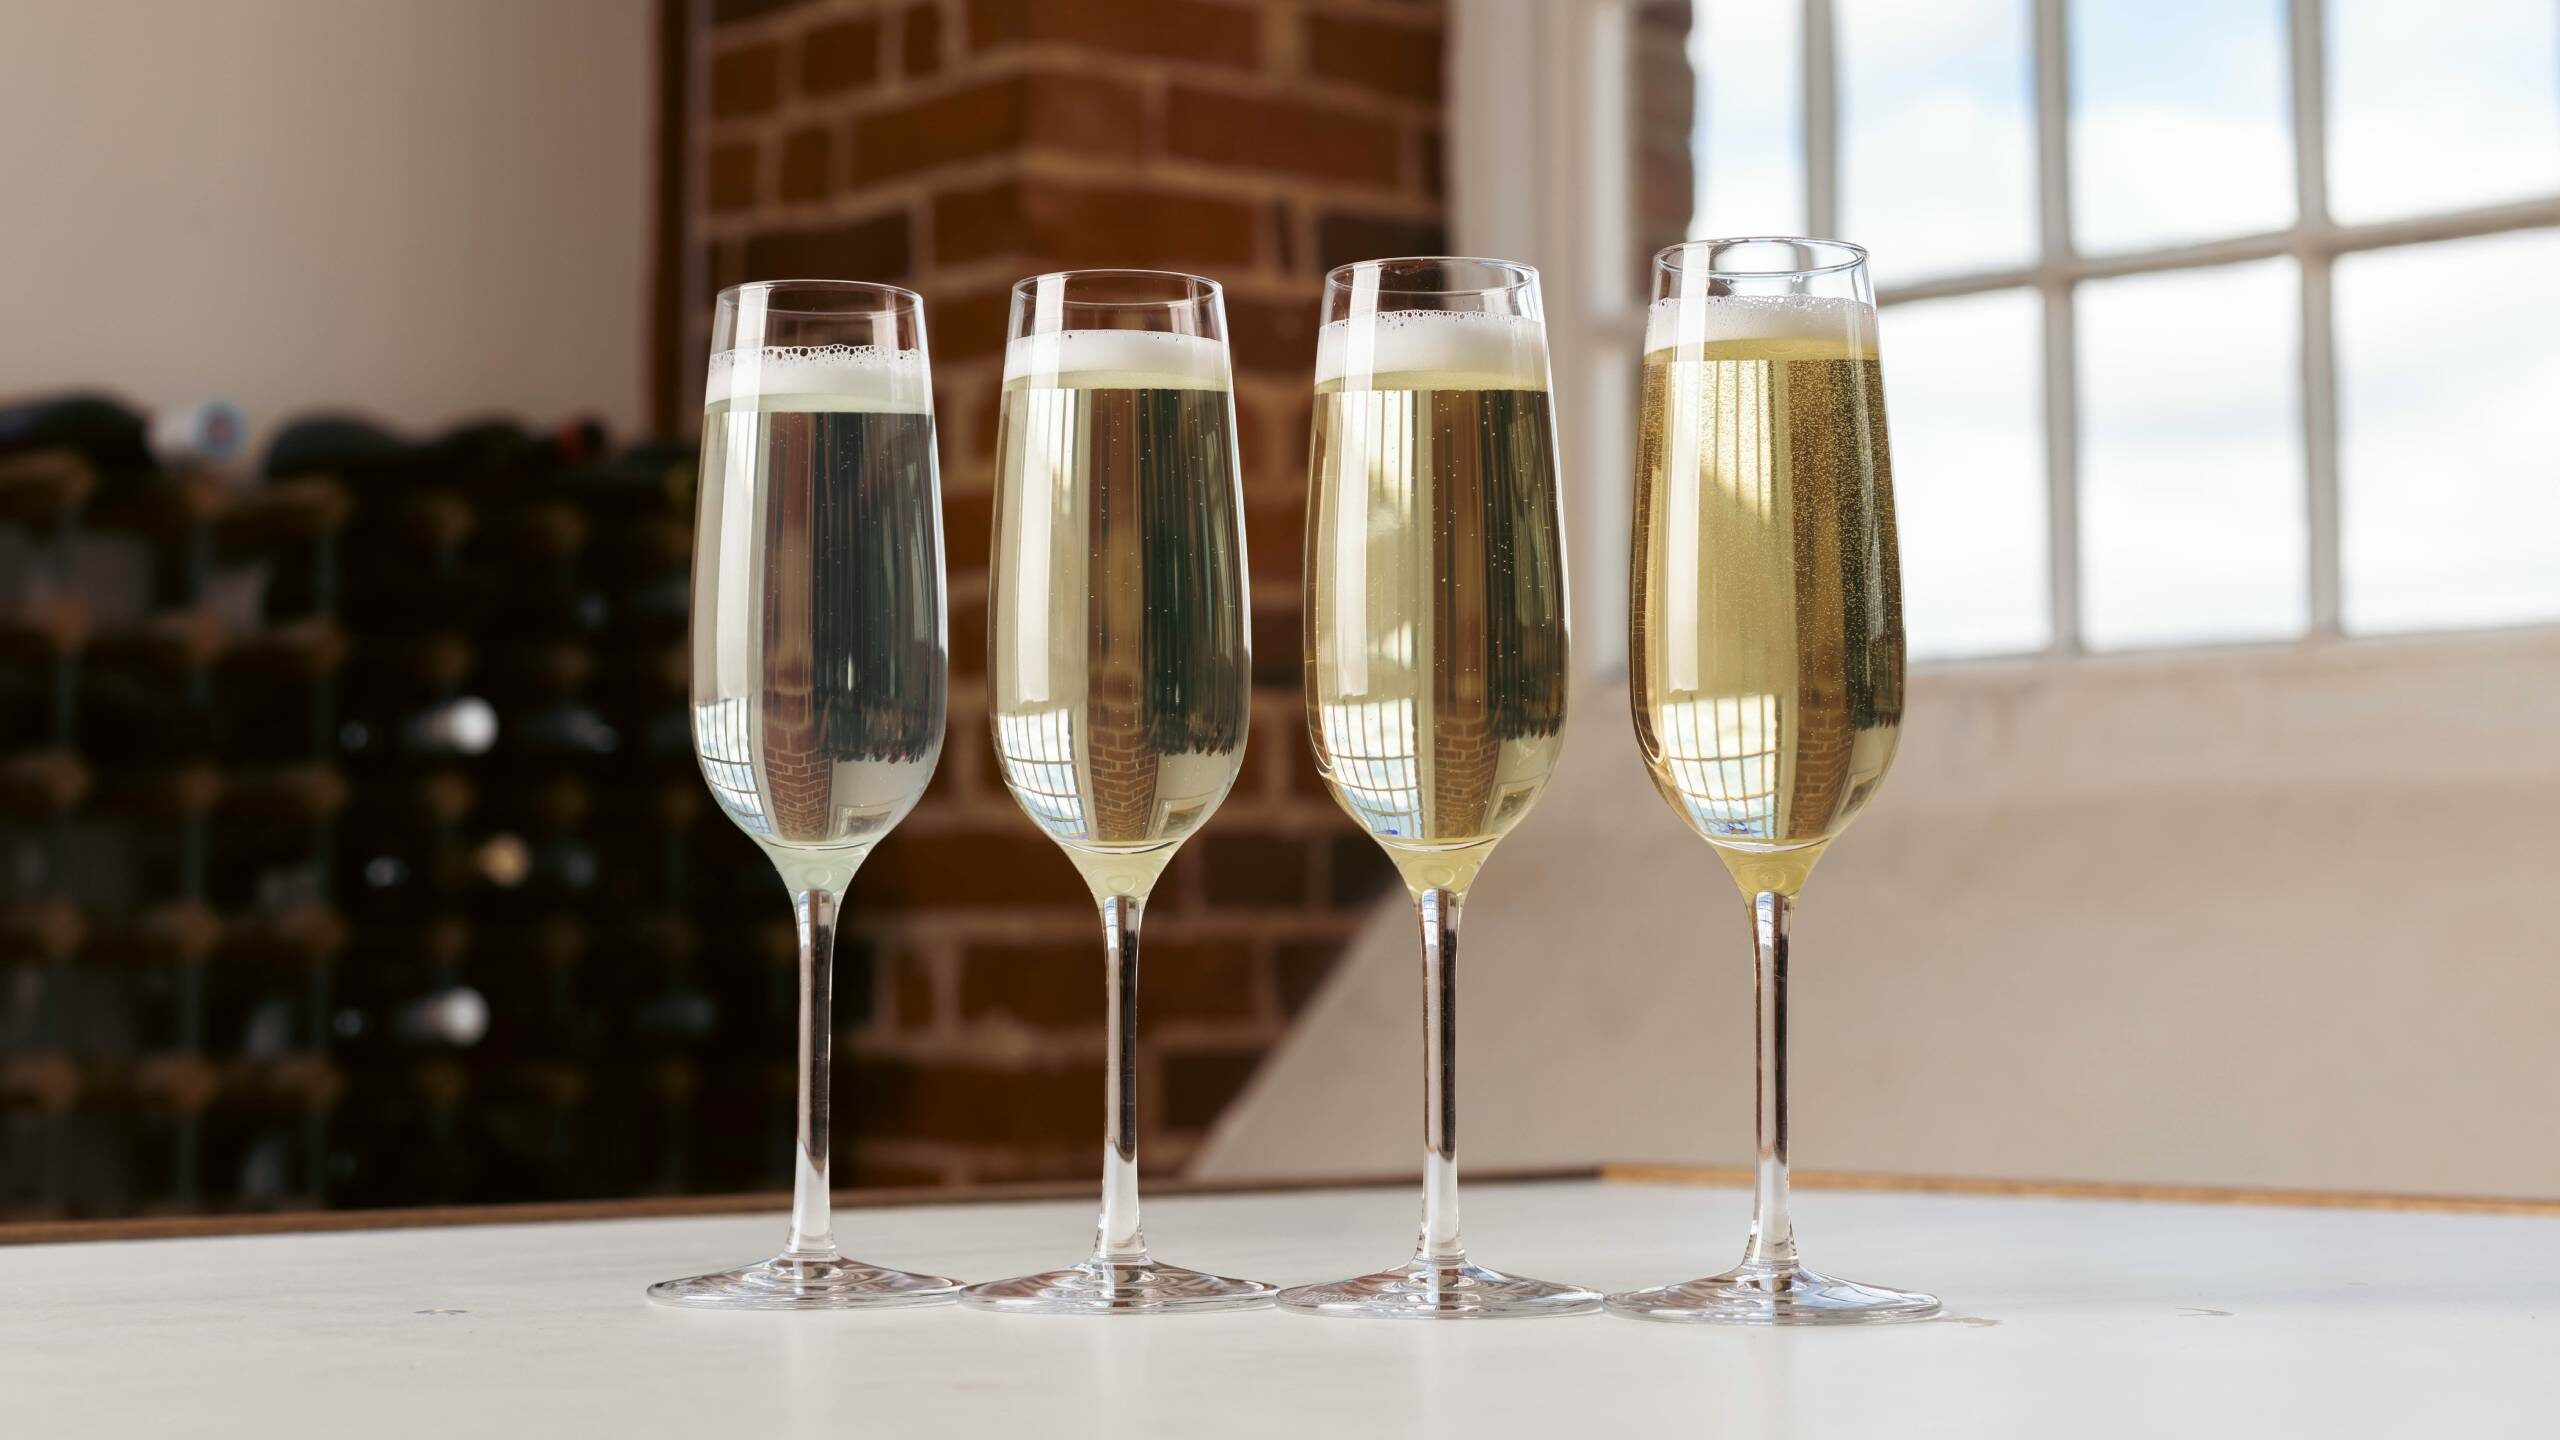 https://www.virginwines.co.uk/hub/wp-content/uploads/2022/08/Four-flute-glasses-of-sparkling-wine-lined-up-on-a-table-showing-different-types-of-sparkling-wine-2560x1440.jpg